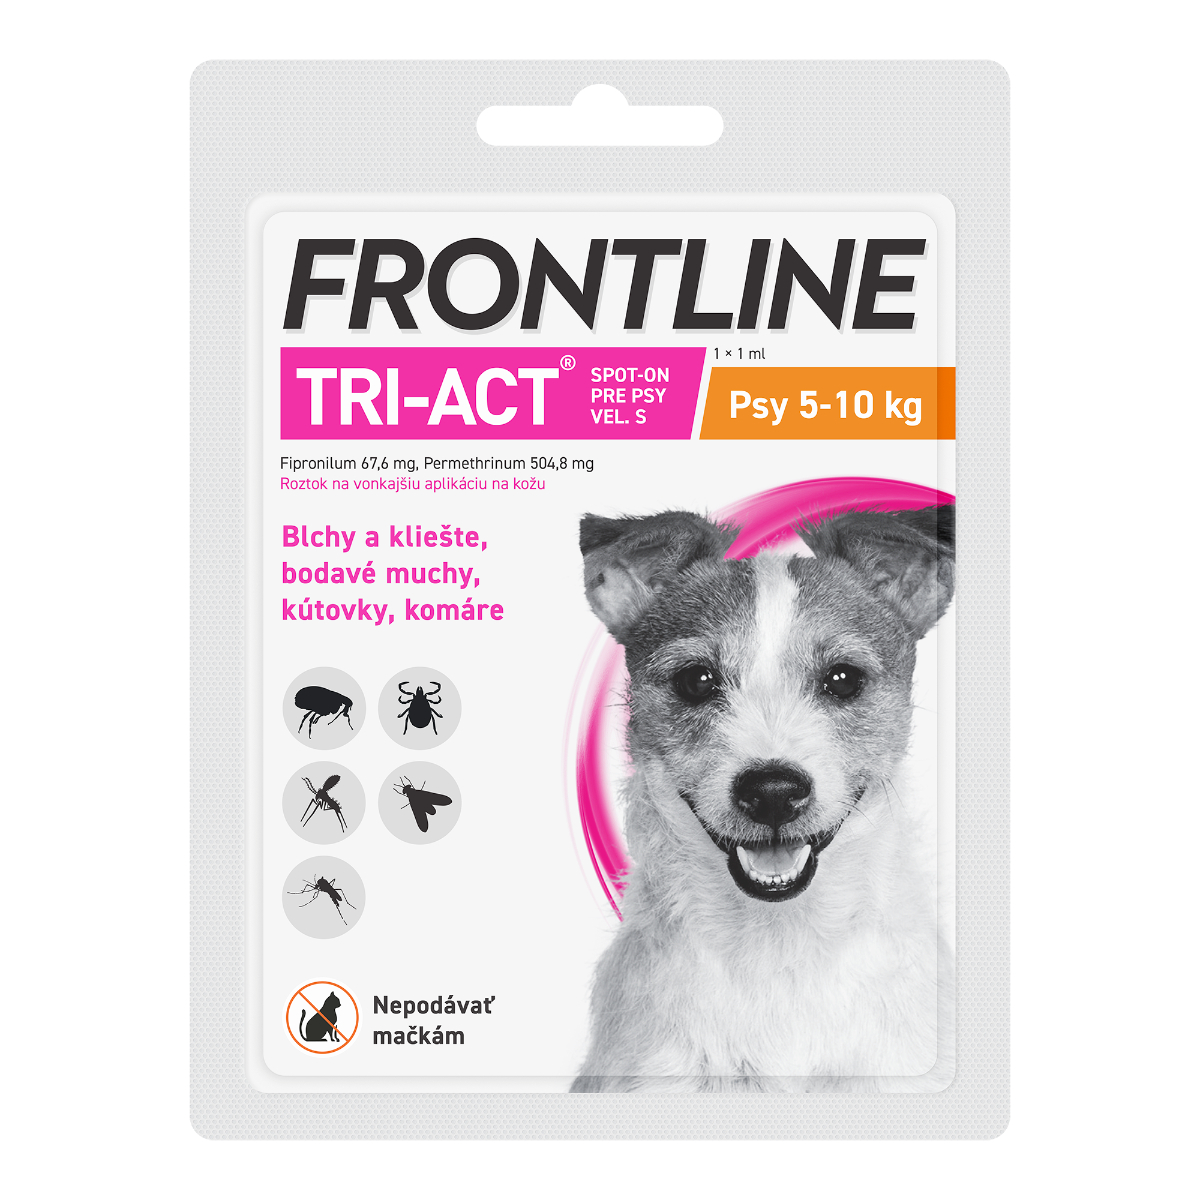 Frontline Tri-Act Spot-on pro psy S 5-10 kg 1 ml